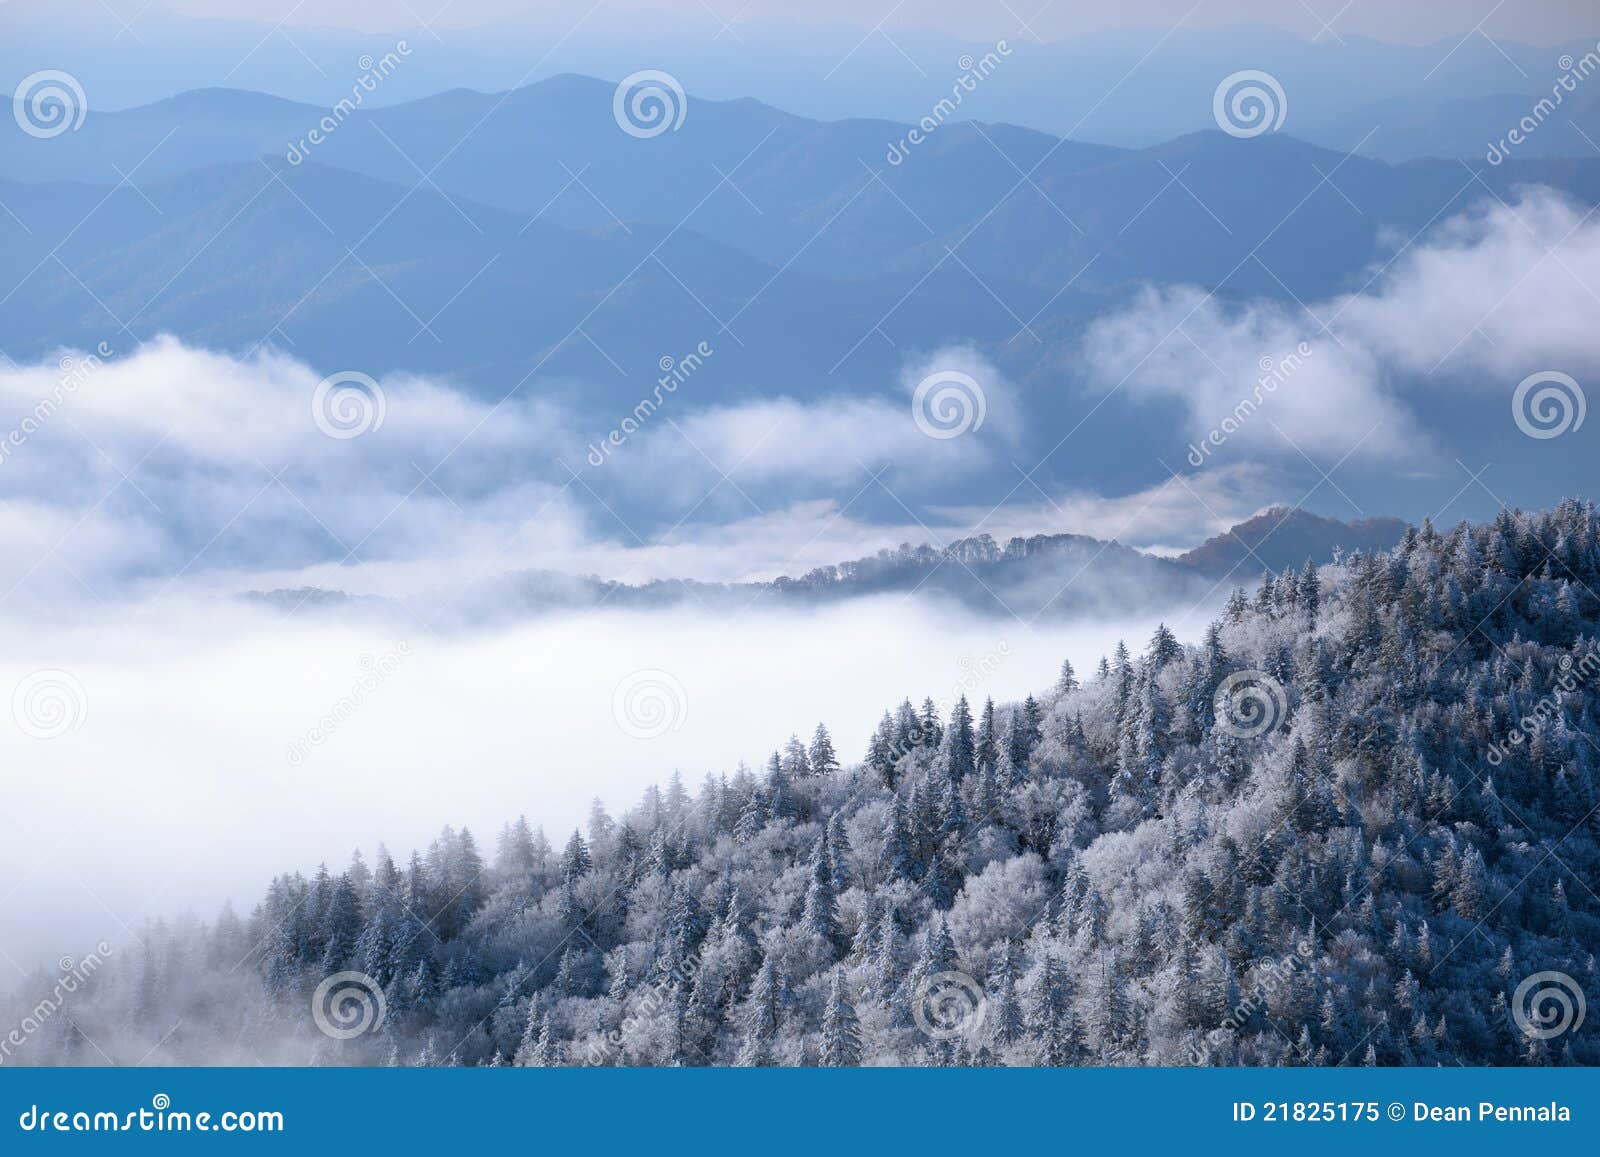 winter, great smoky mountains